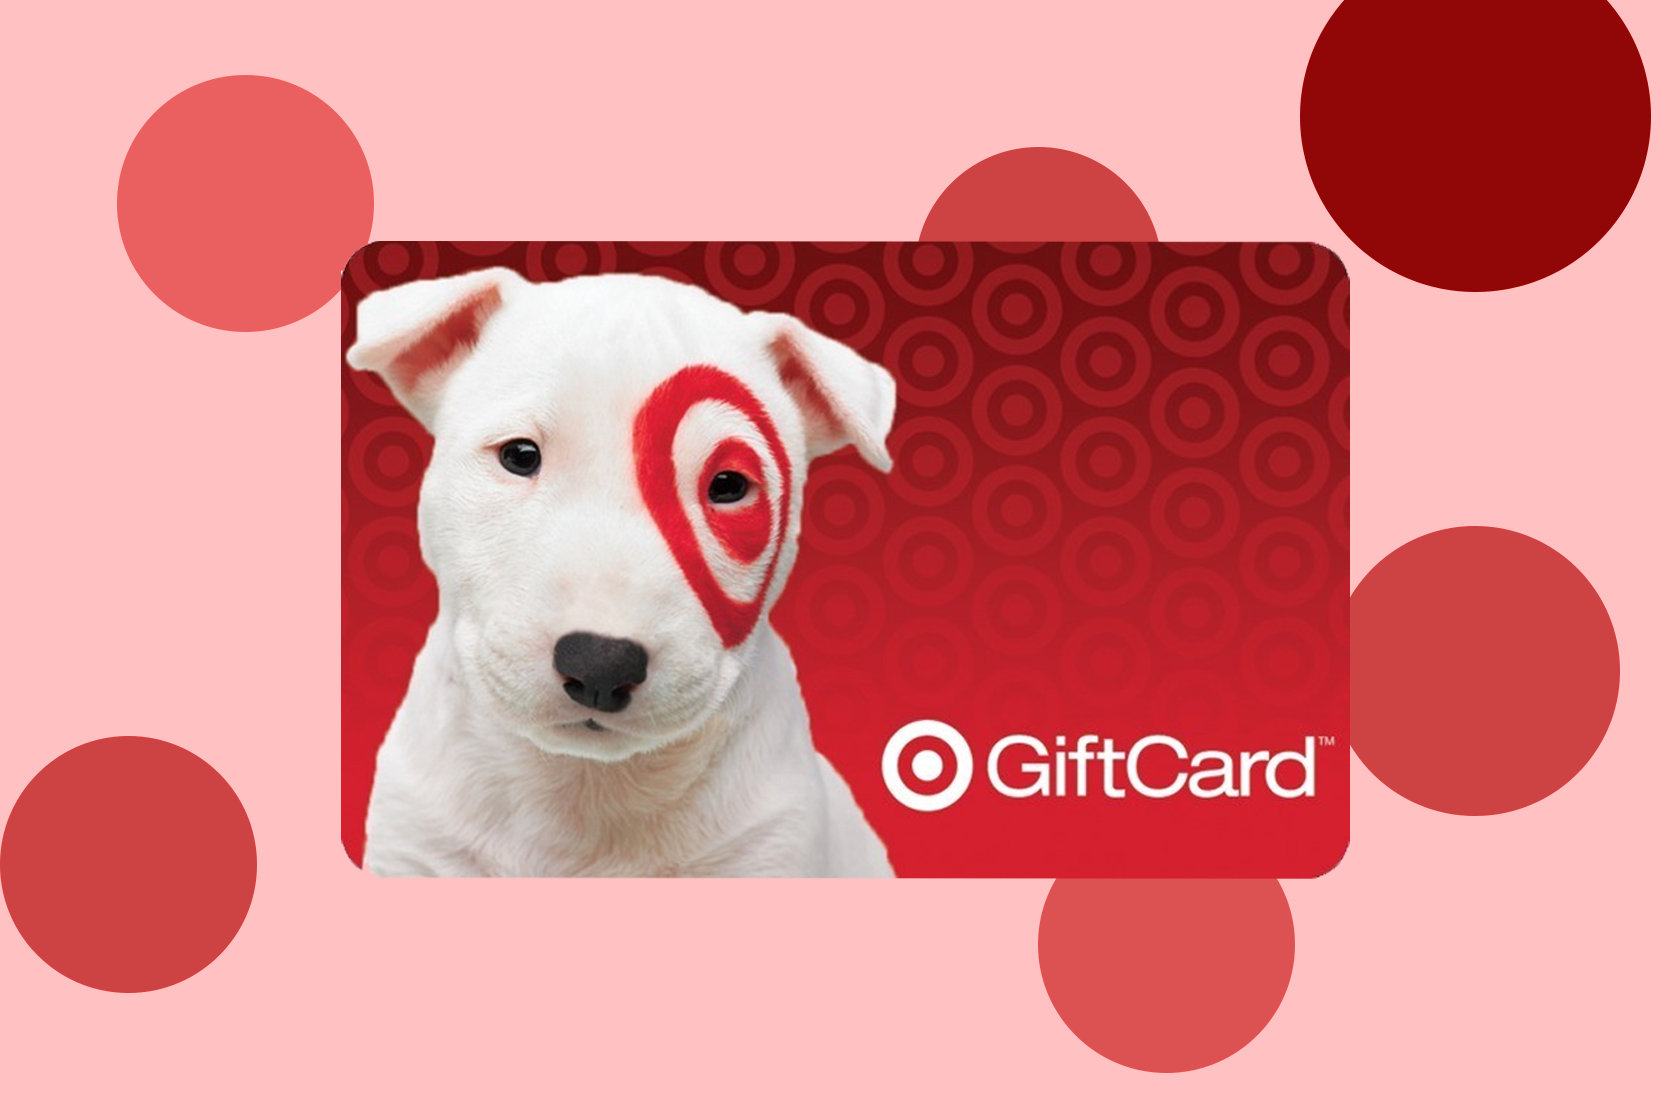 target-gift-cards-are-10-off-ahead-of-their-largest-sales-event-of-the-year